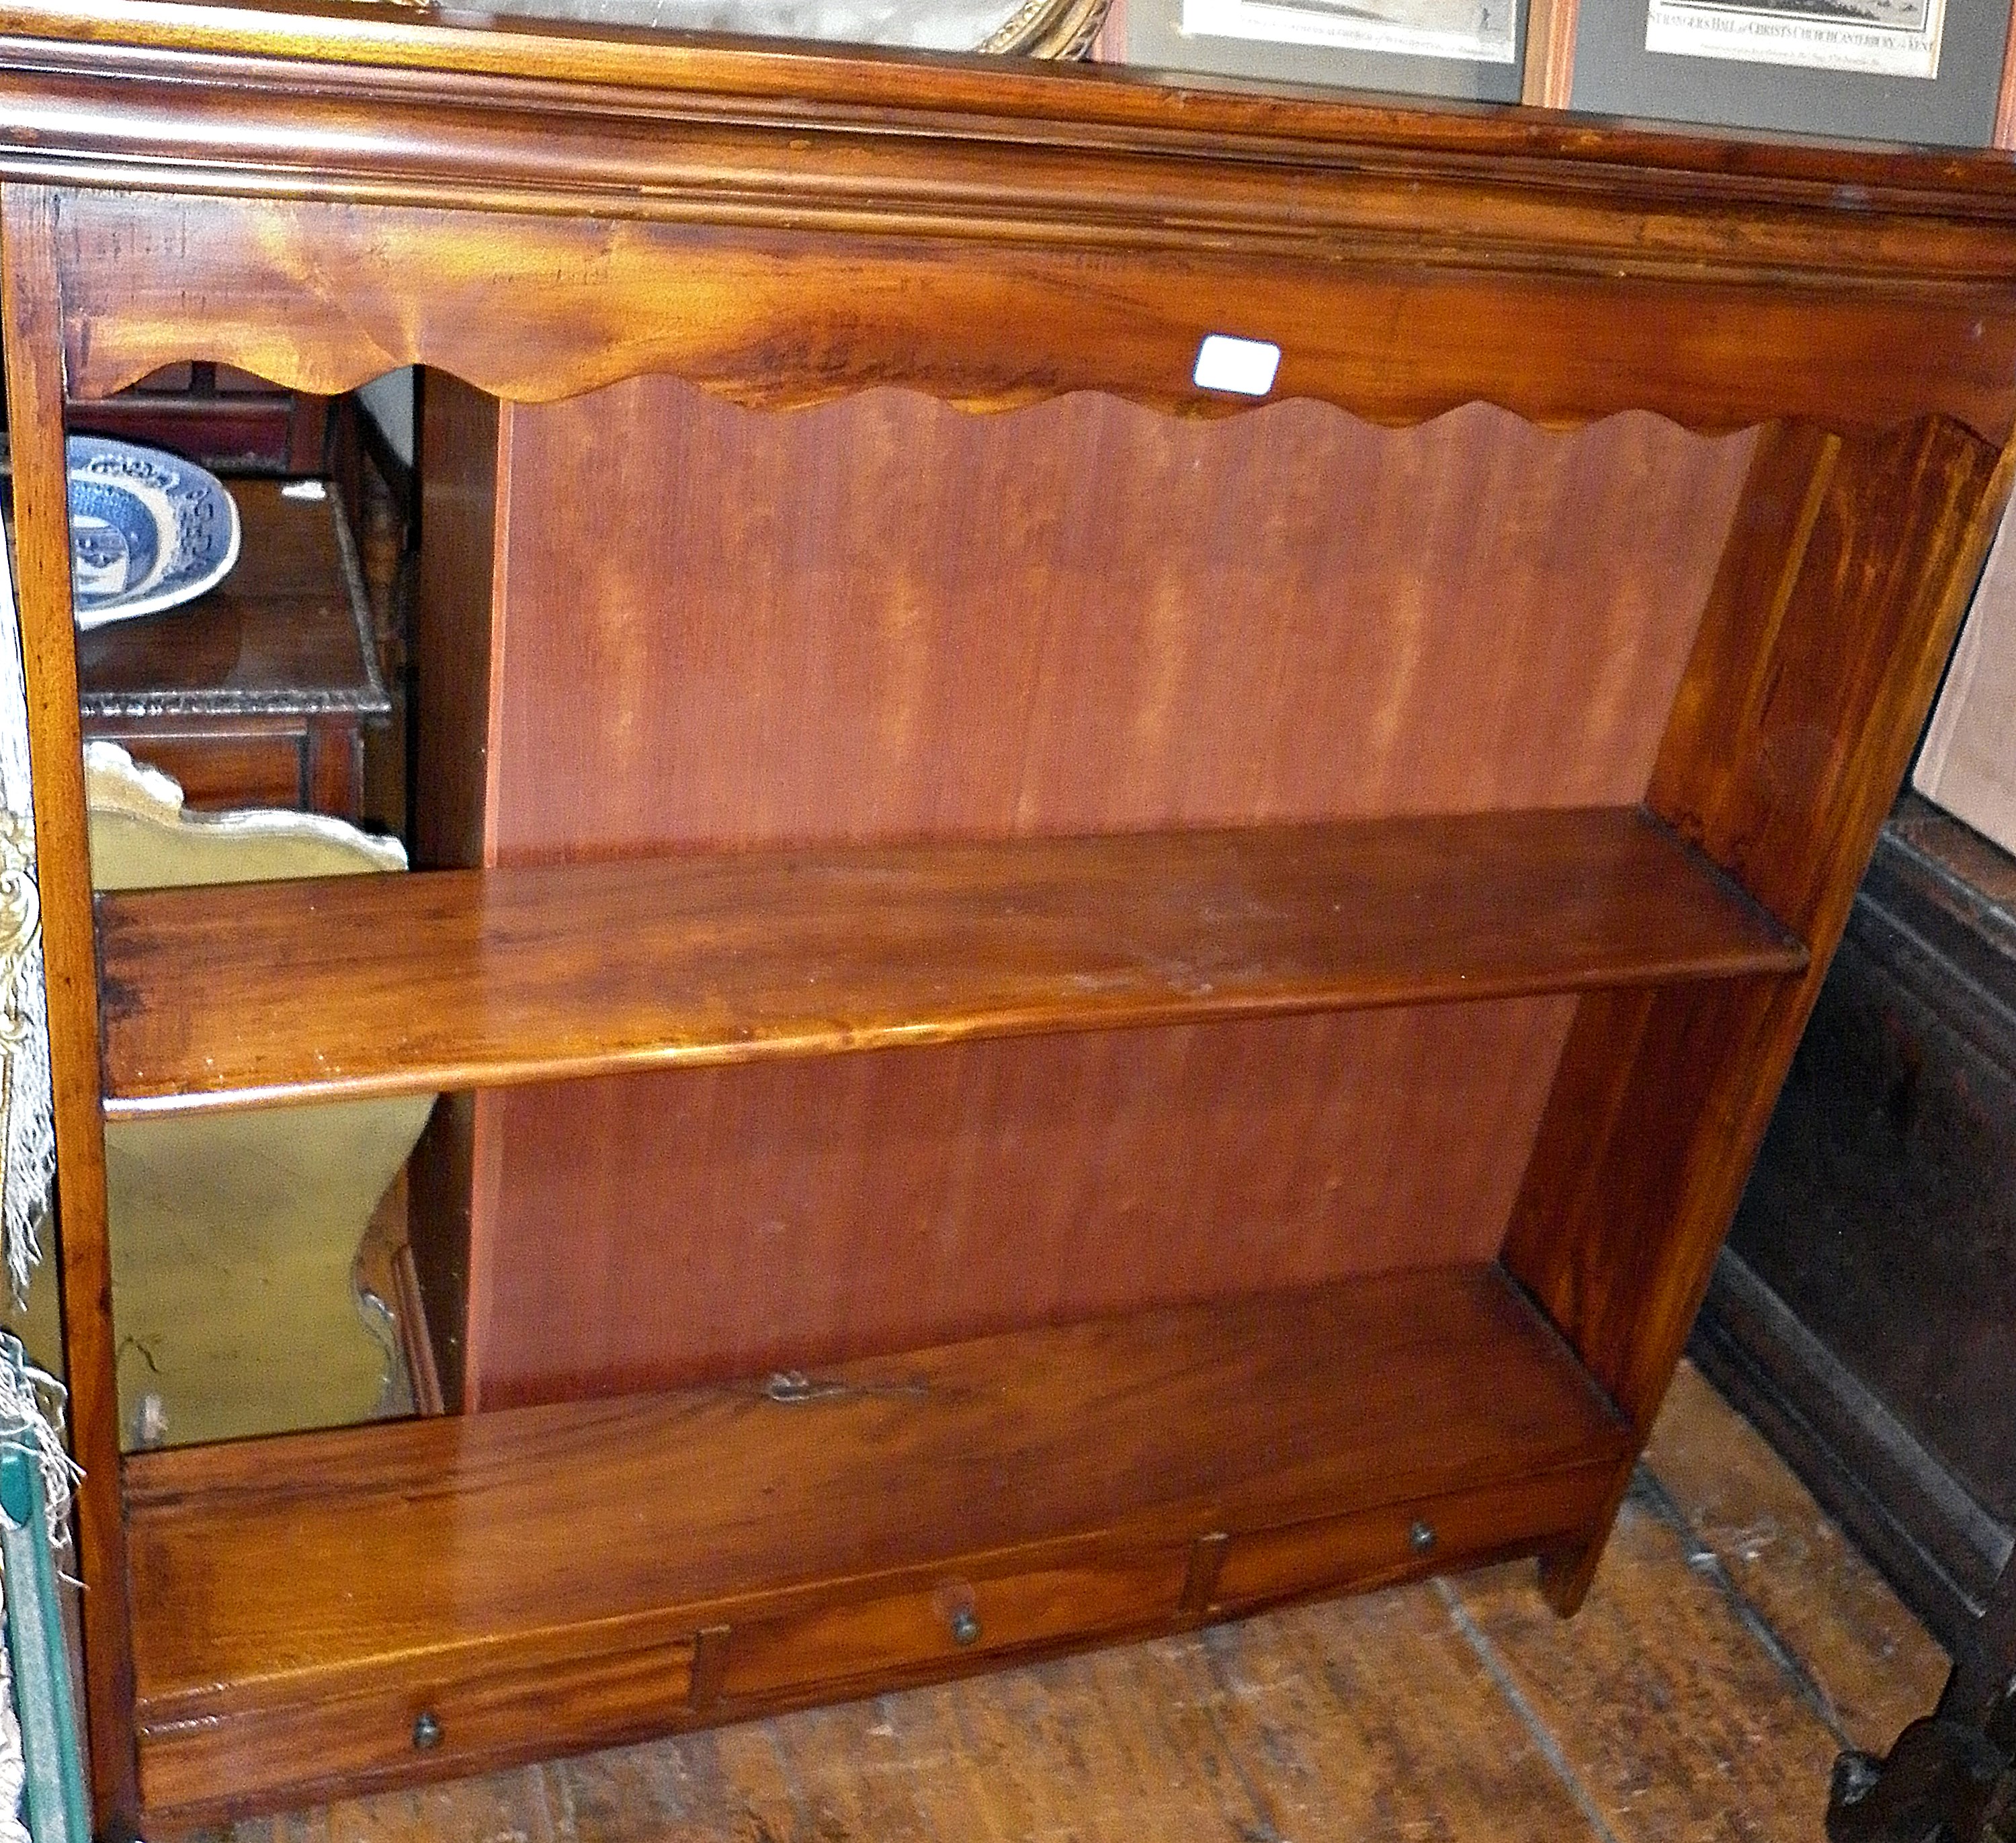 Mahogany hanging shelves with drawers under